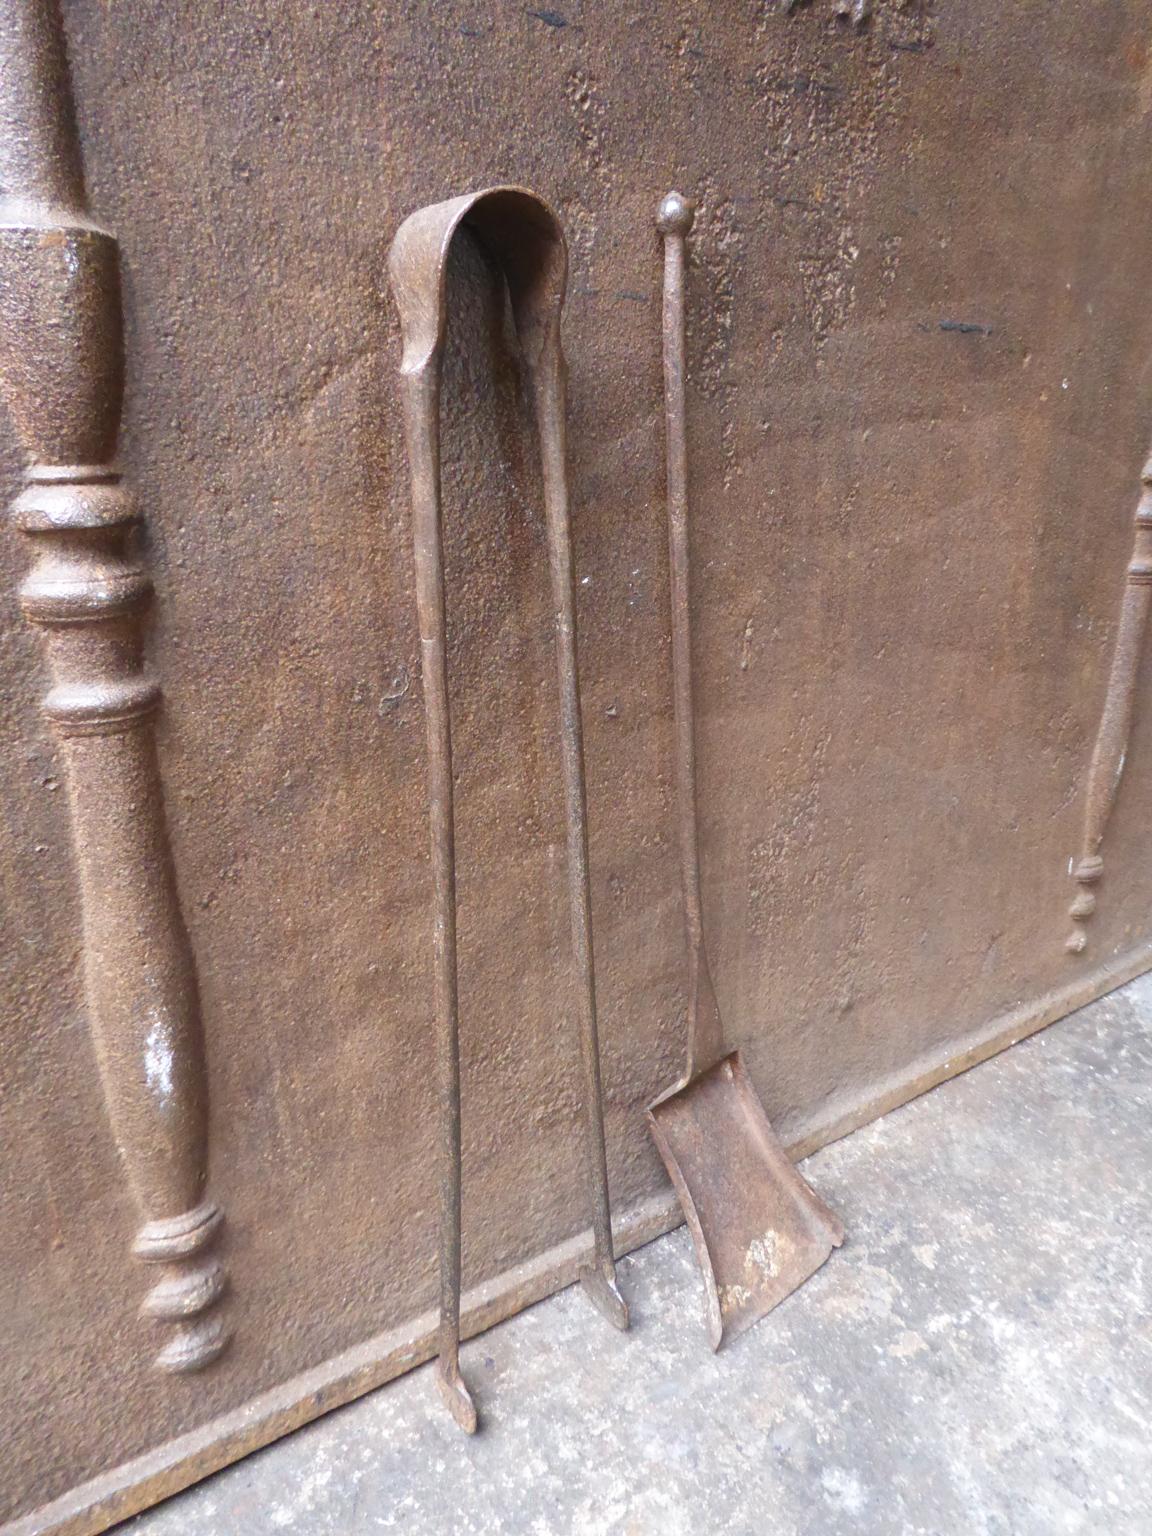 18th century French Louis XV fireplace tool set consisting of fireplace tongs and a shovel. The fire irons are made of wrought iron. They are in a good condition and are fully functional.